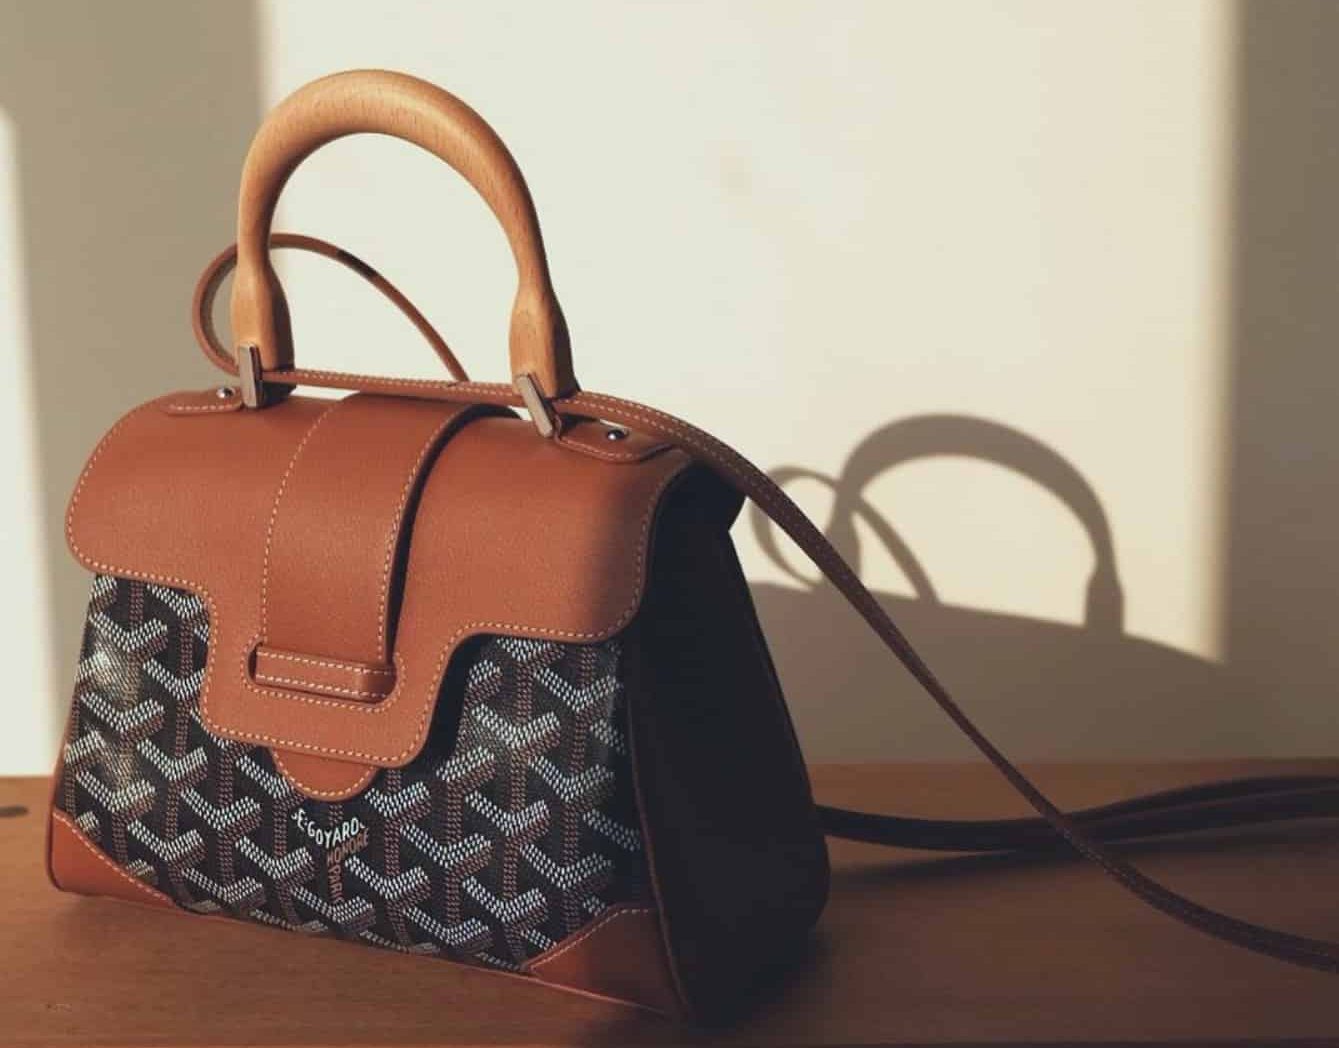 Read more about the article 8 Things to Know About the Goyard Saigon Bag: Prices, Styles, Review and More